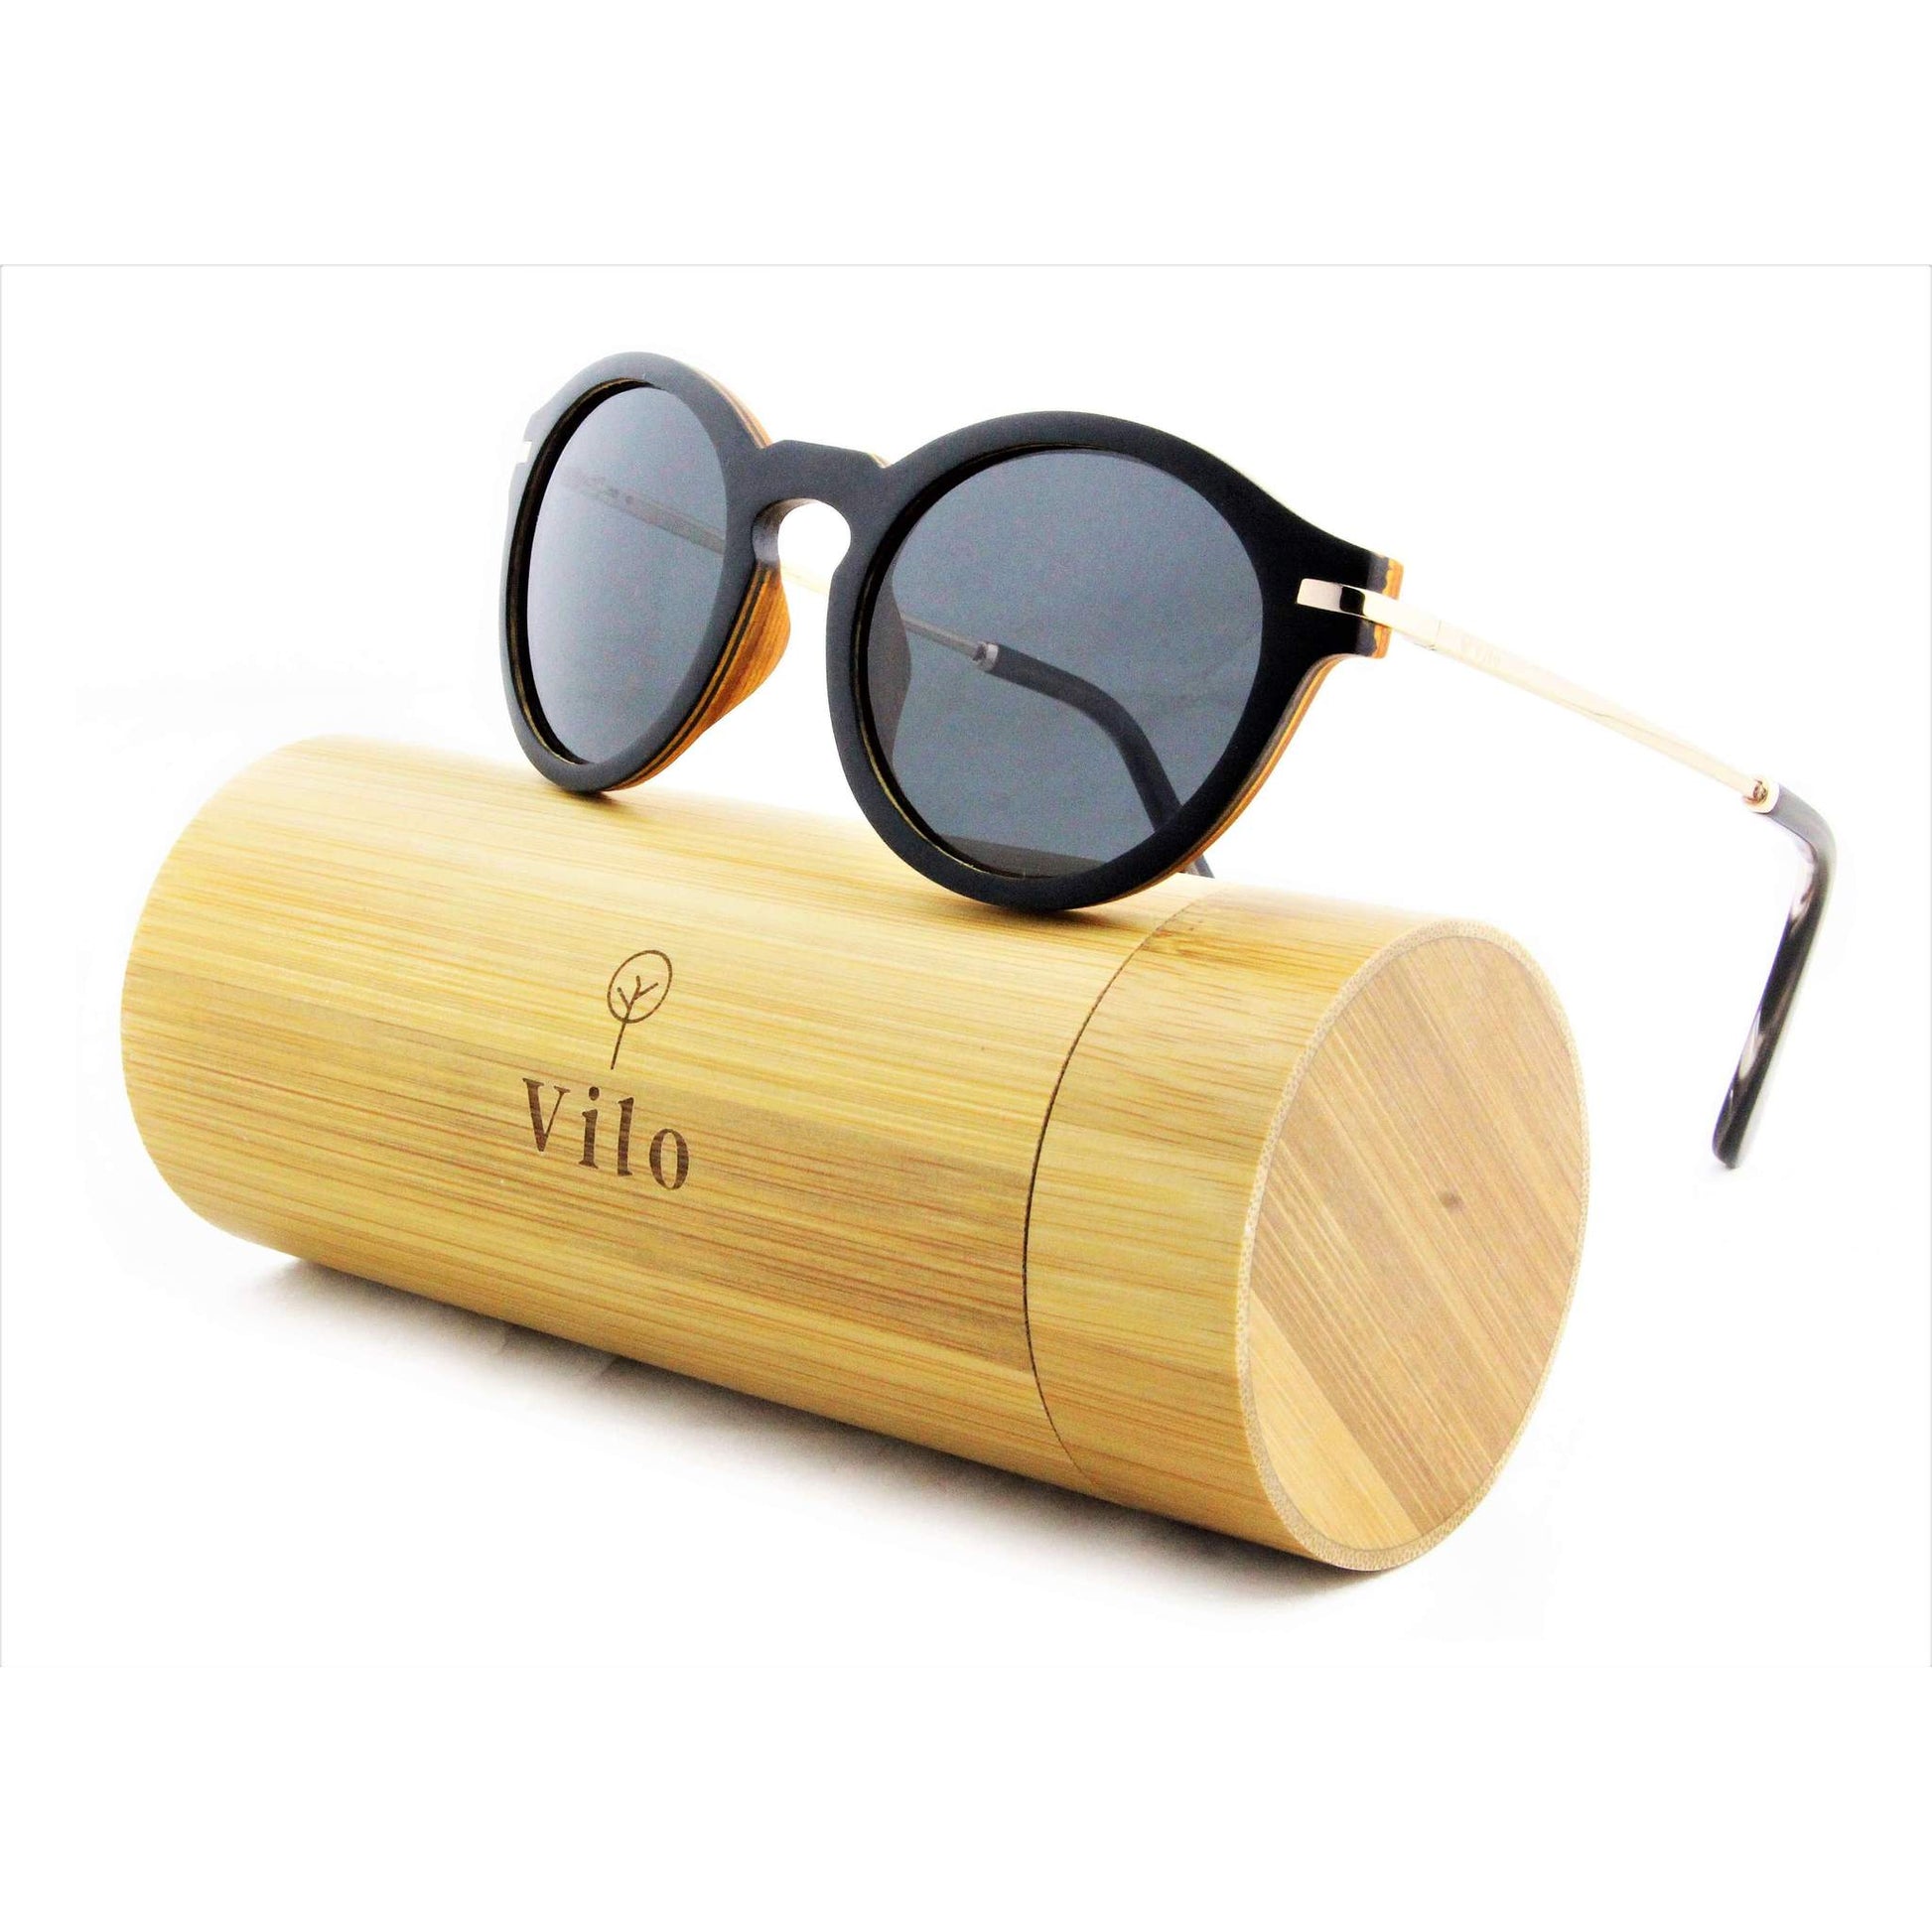 Vilo Wooden Sunglasses Bounty with bamboo case